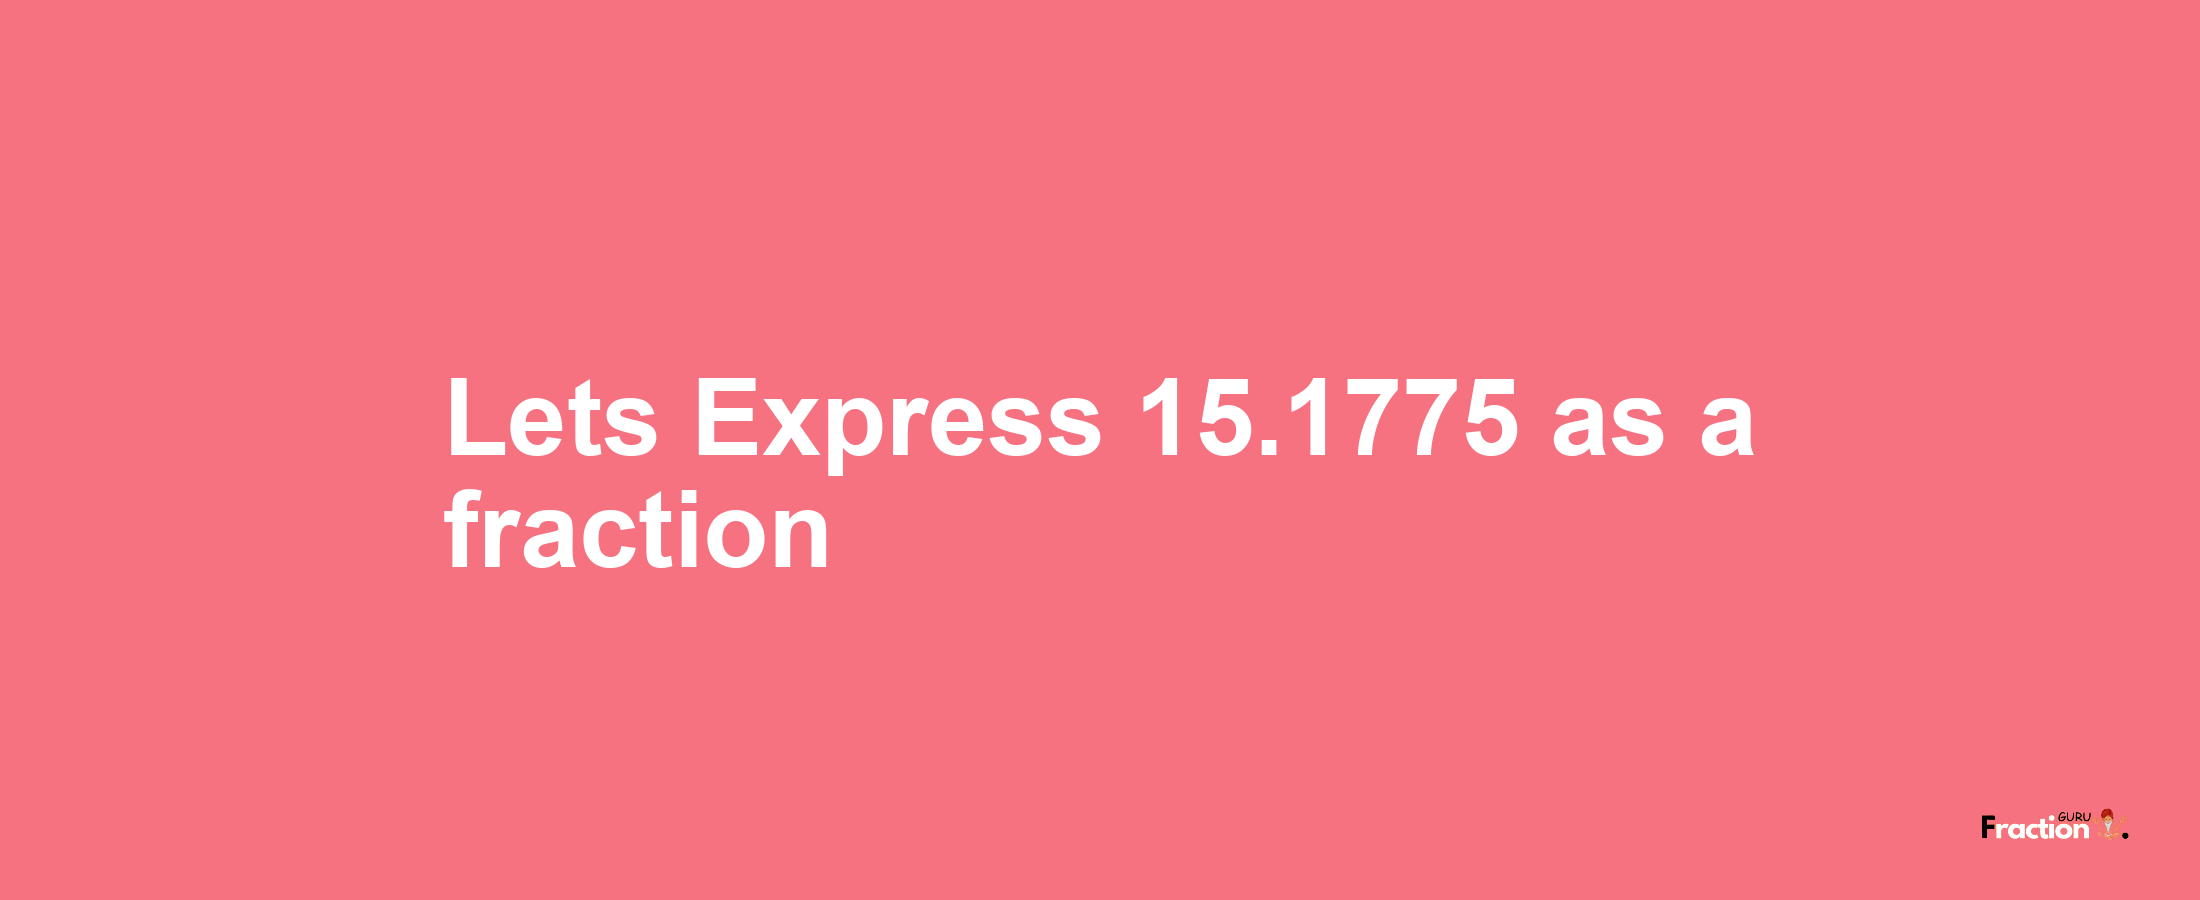 Lets Express 15.1775 as afraction